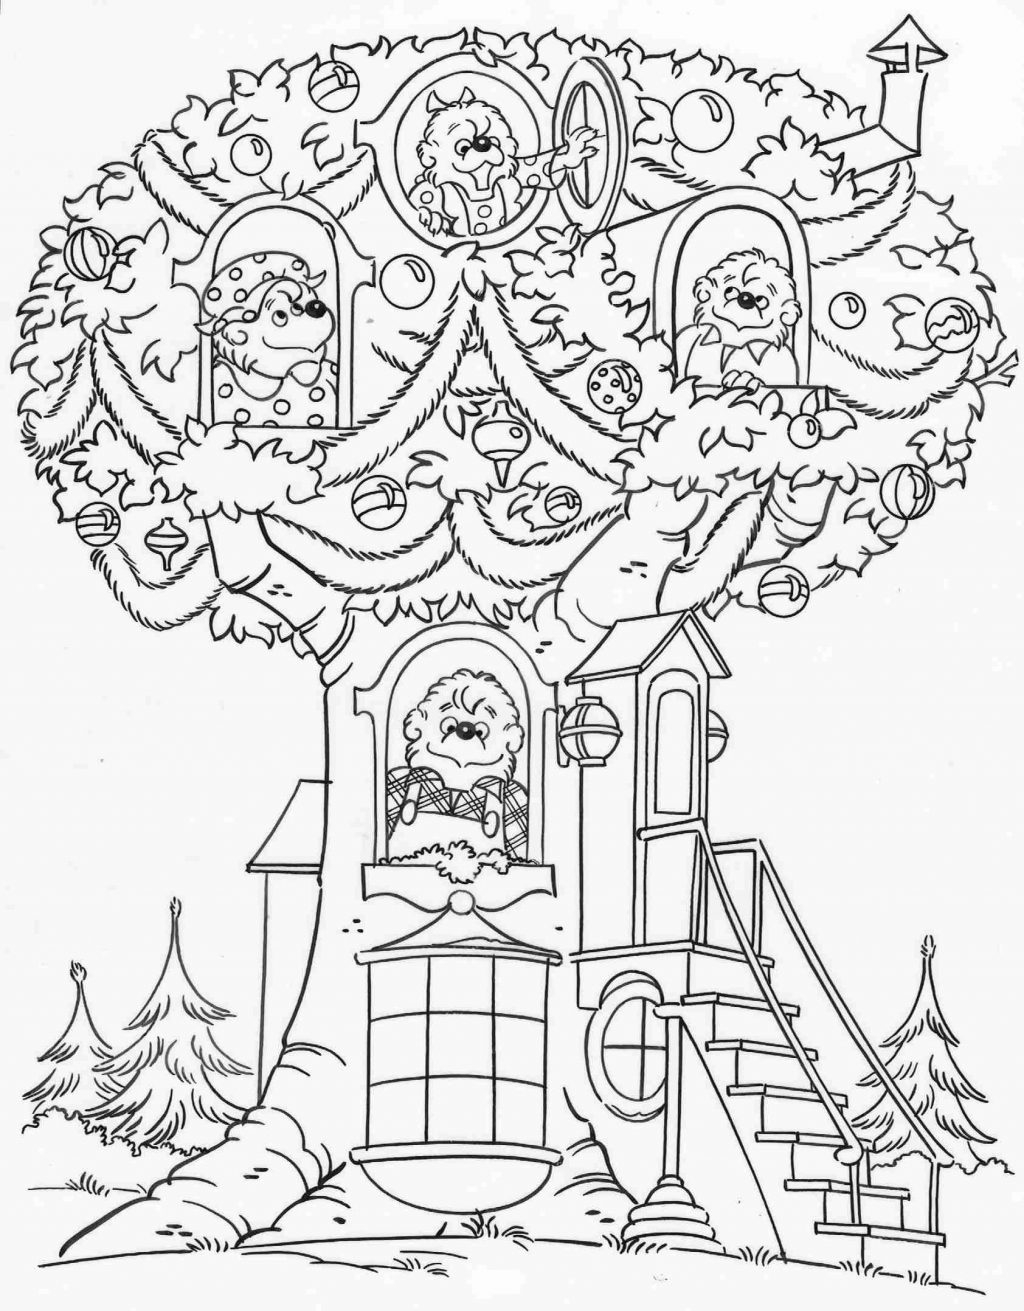 Berenstain Bears Coloring Pages Coloring Page Elegant Berenstain Bears Coloring Pages In Free Kids